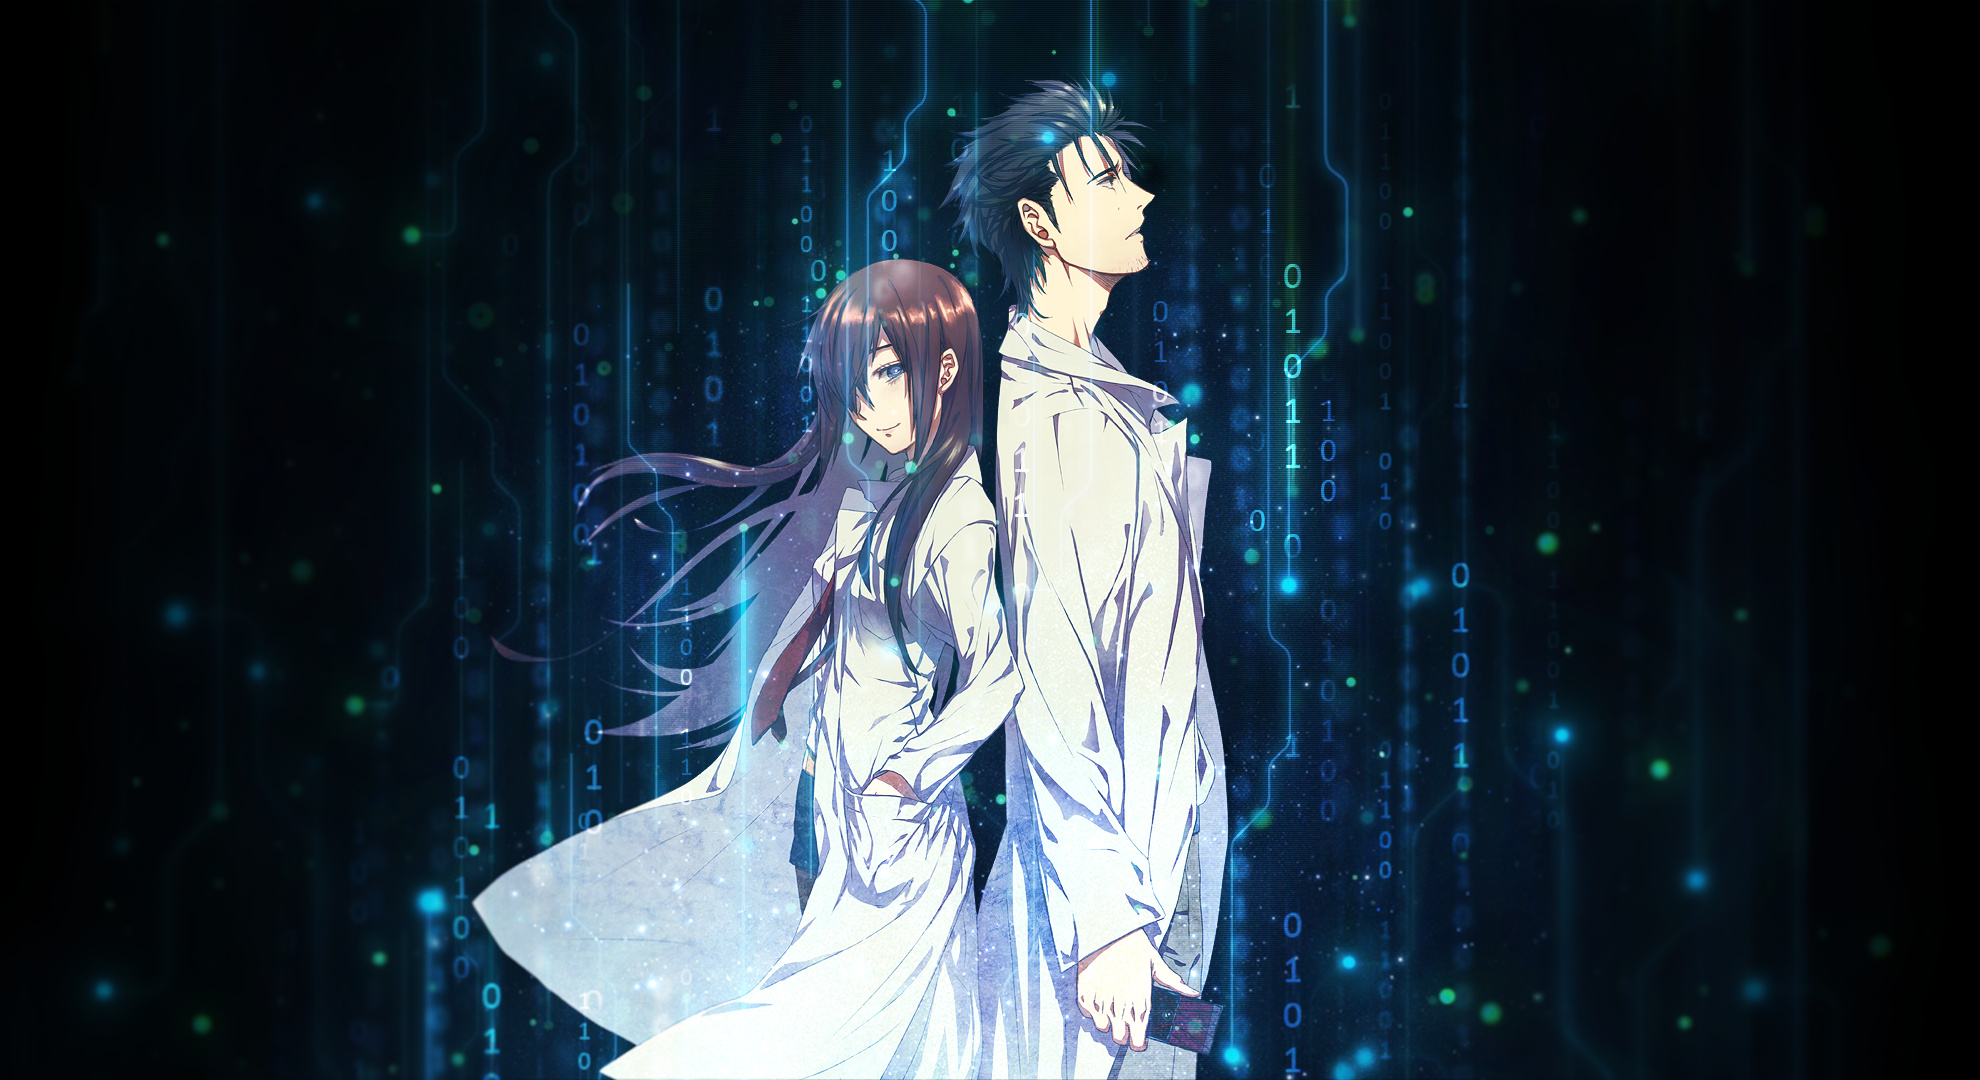 Steins; Gate anime, Steins Gate HD wallpapers, Anime characters, Time travel, 1980x1080 HD Desktop